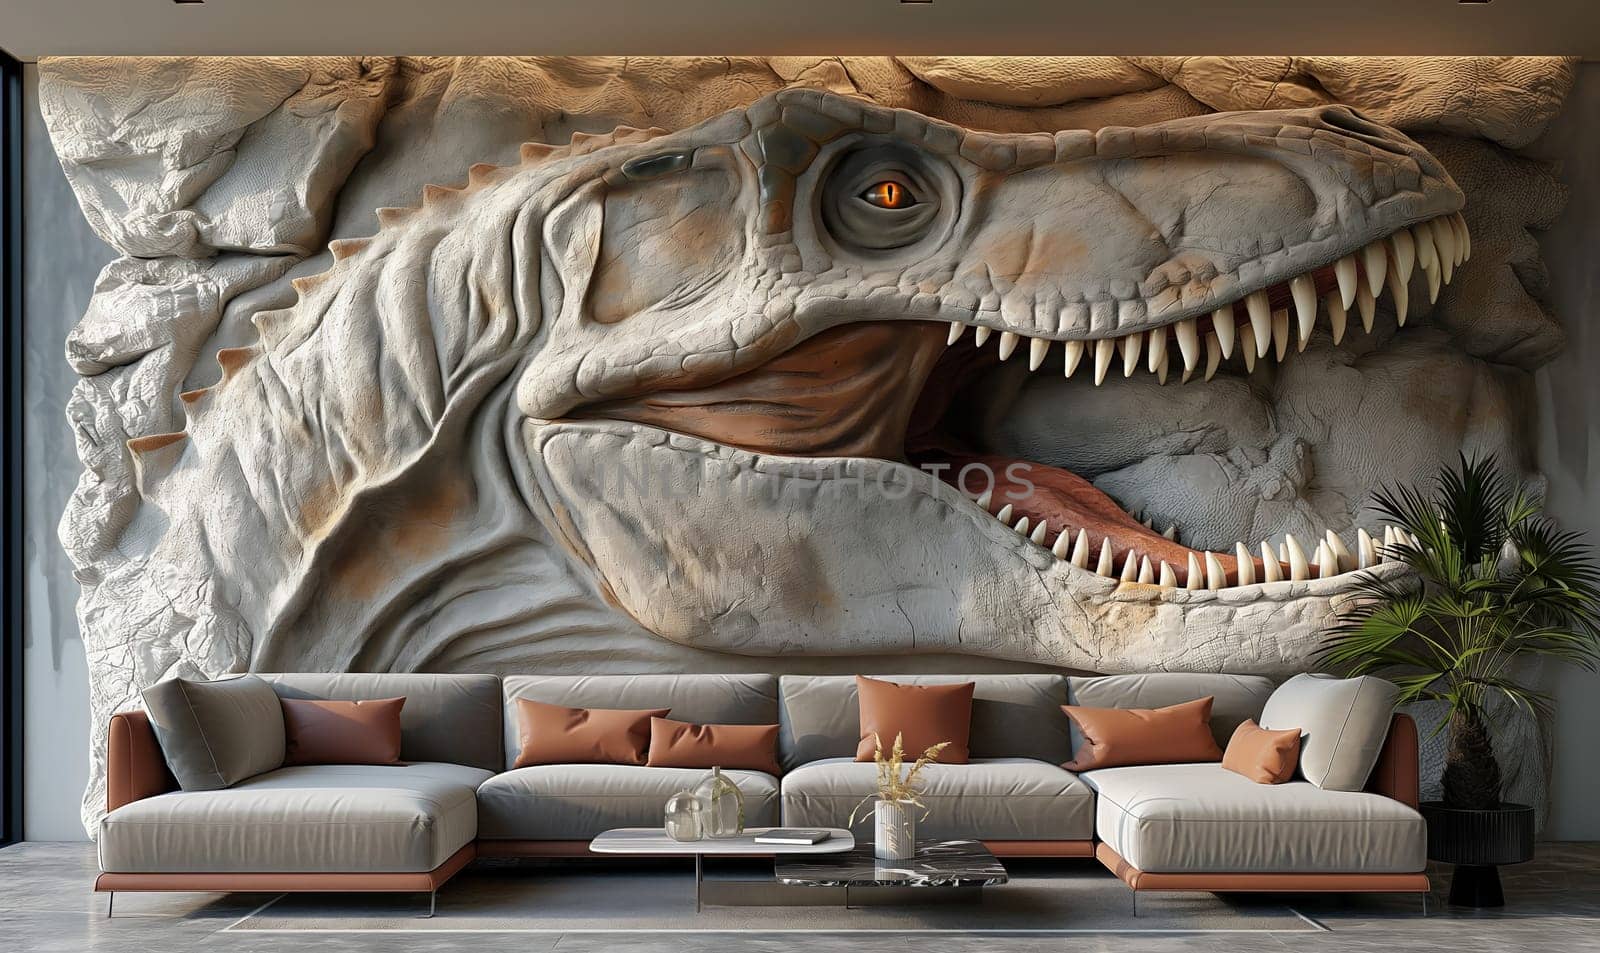 3d wallpaper, dinosaur made of stone on the wall in the room. Selective focus